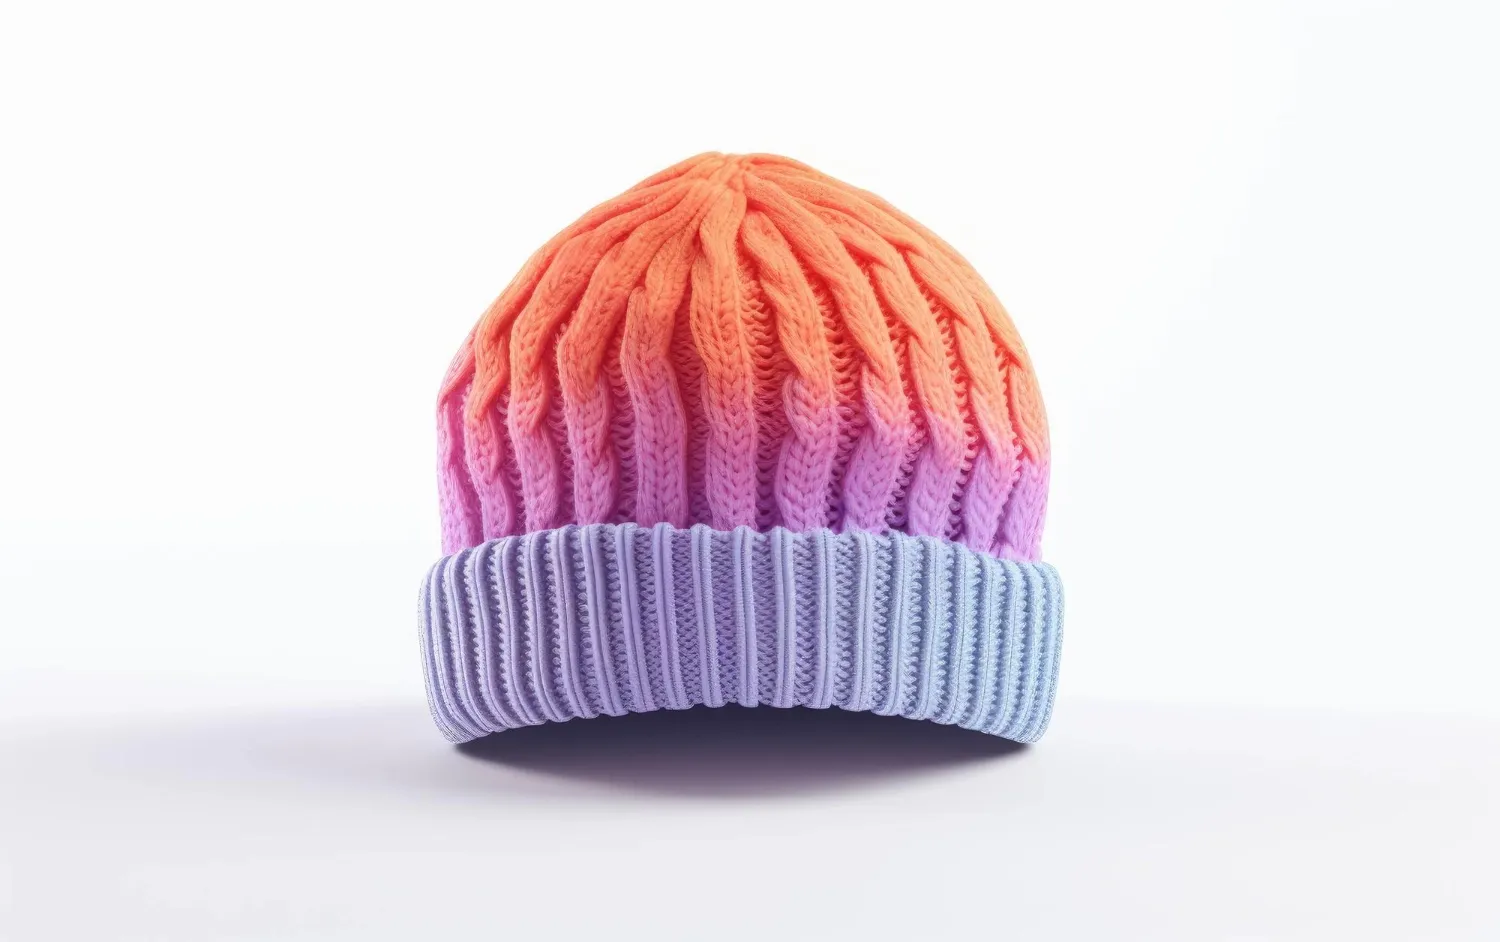 Contemporary Beanie Style Shot on White Background